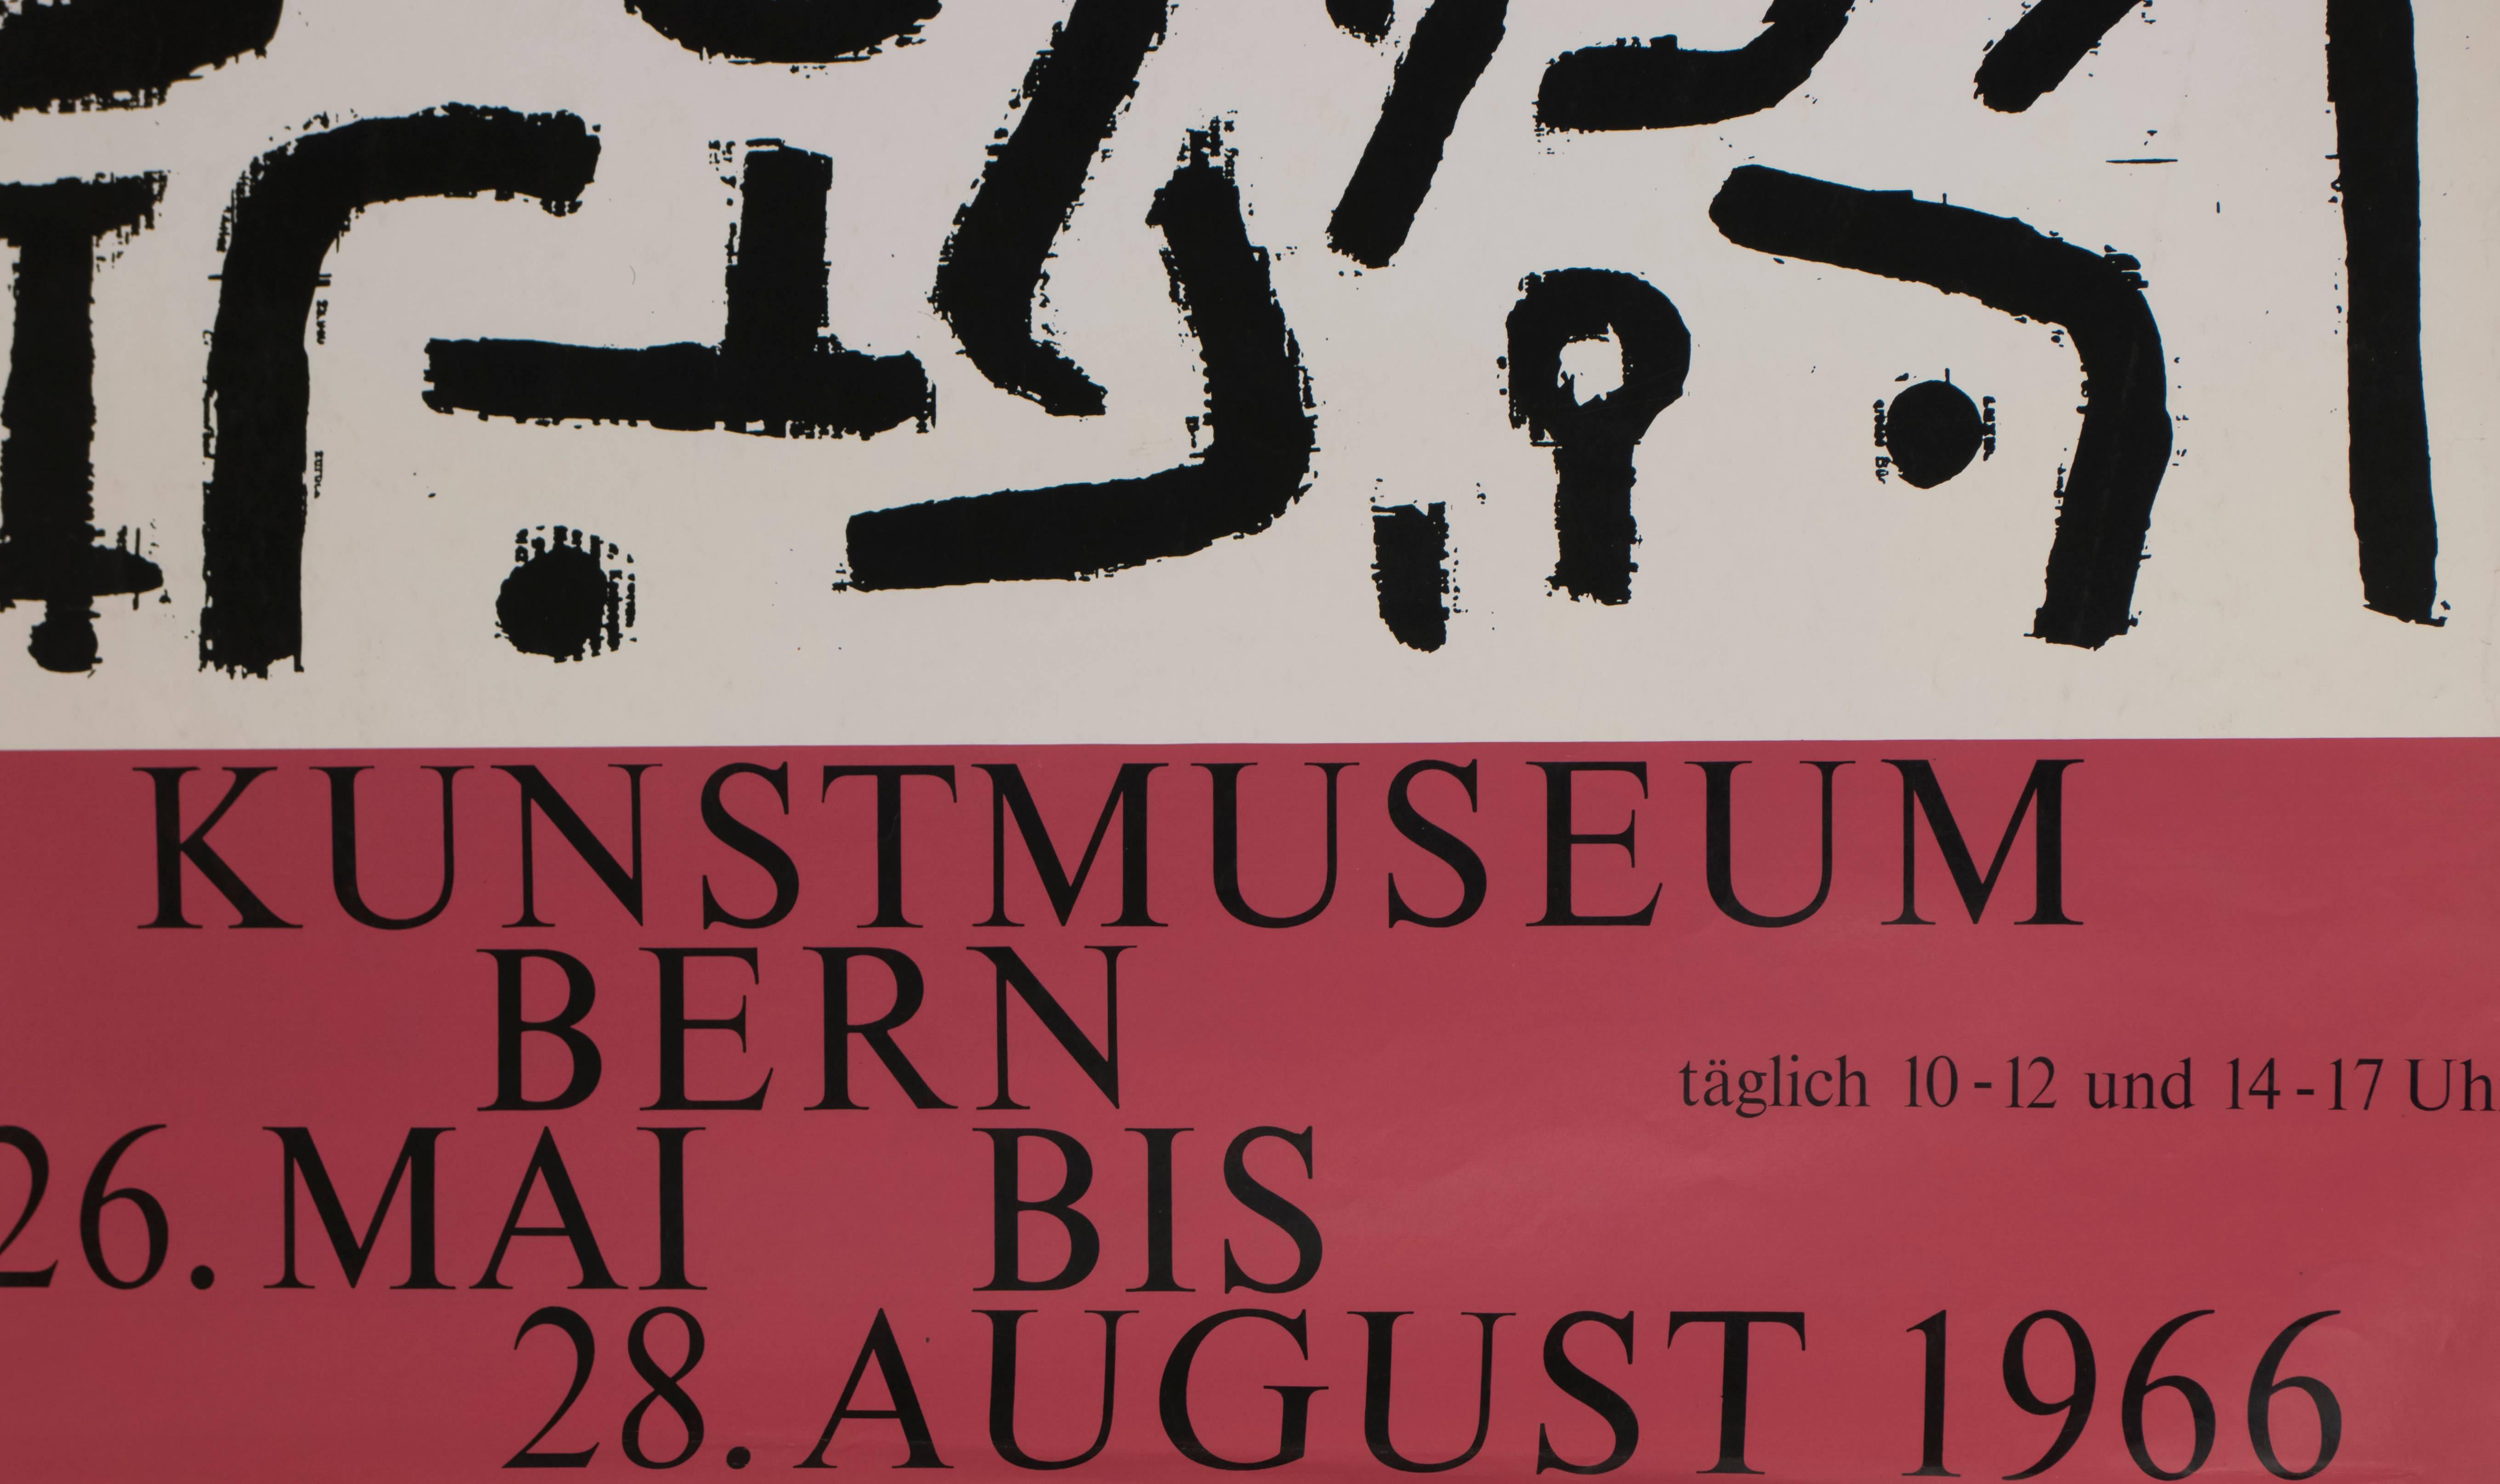 Bern Museum Exhibition Poster - Print by Paul Klee